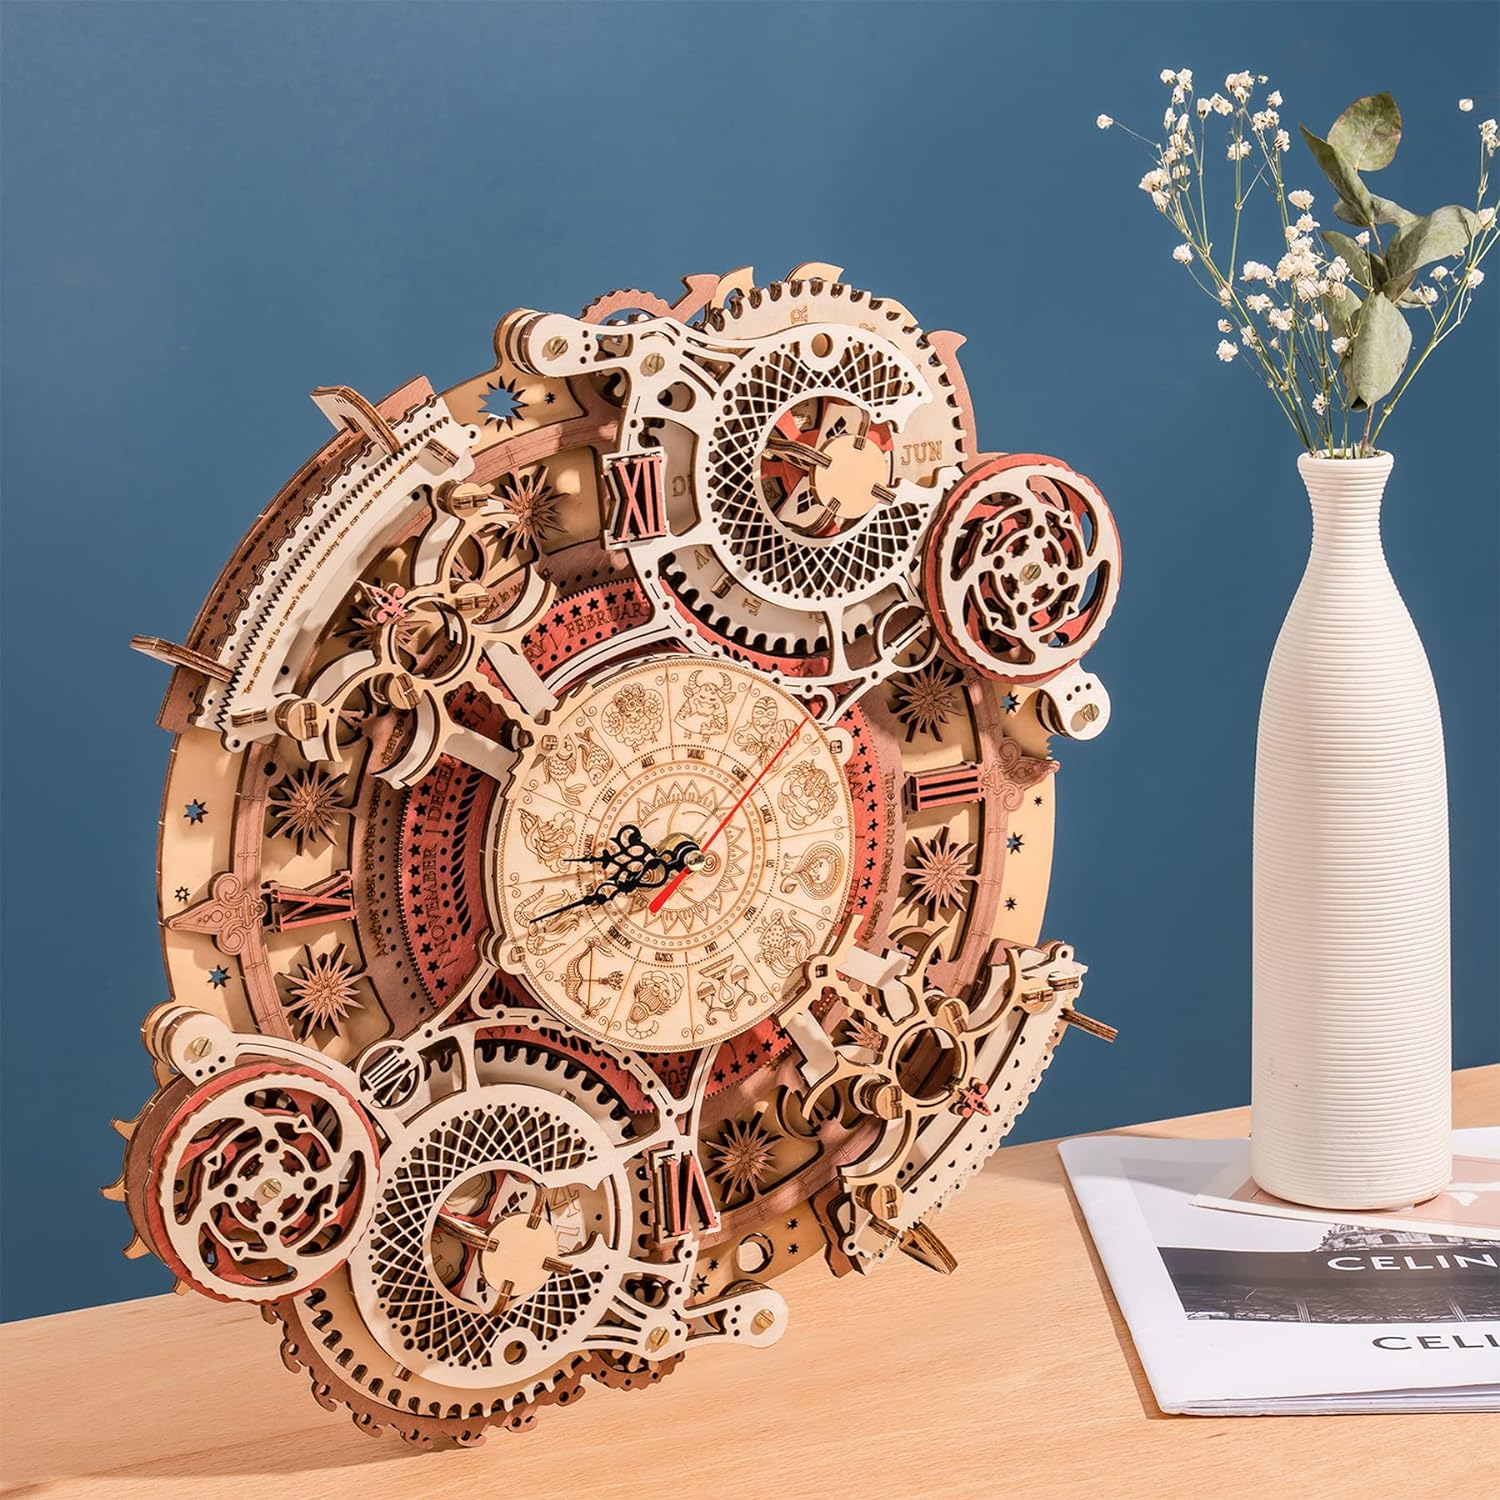 ROBOTIME 3D Wooden Puzzles for Adults, Models for Adults to Build Wooden Steampunk Clock Kit, DIY Mechanical Wall Quartz Aesthetic Room Decor Unique Gift